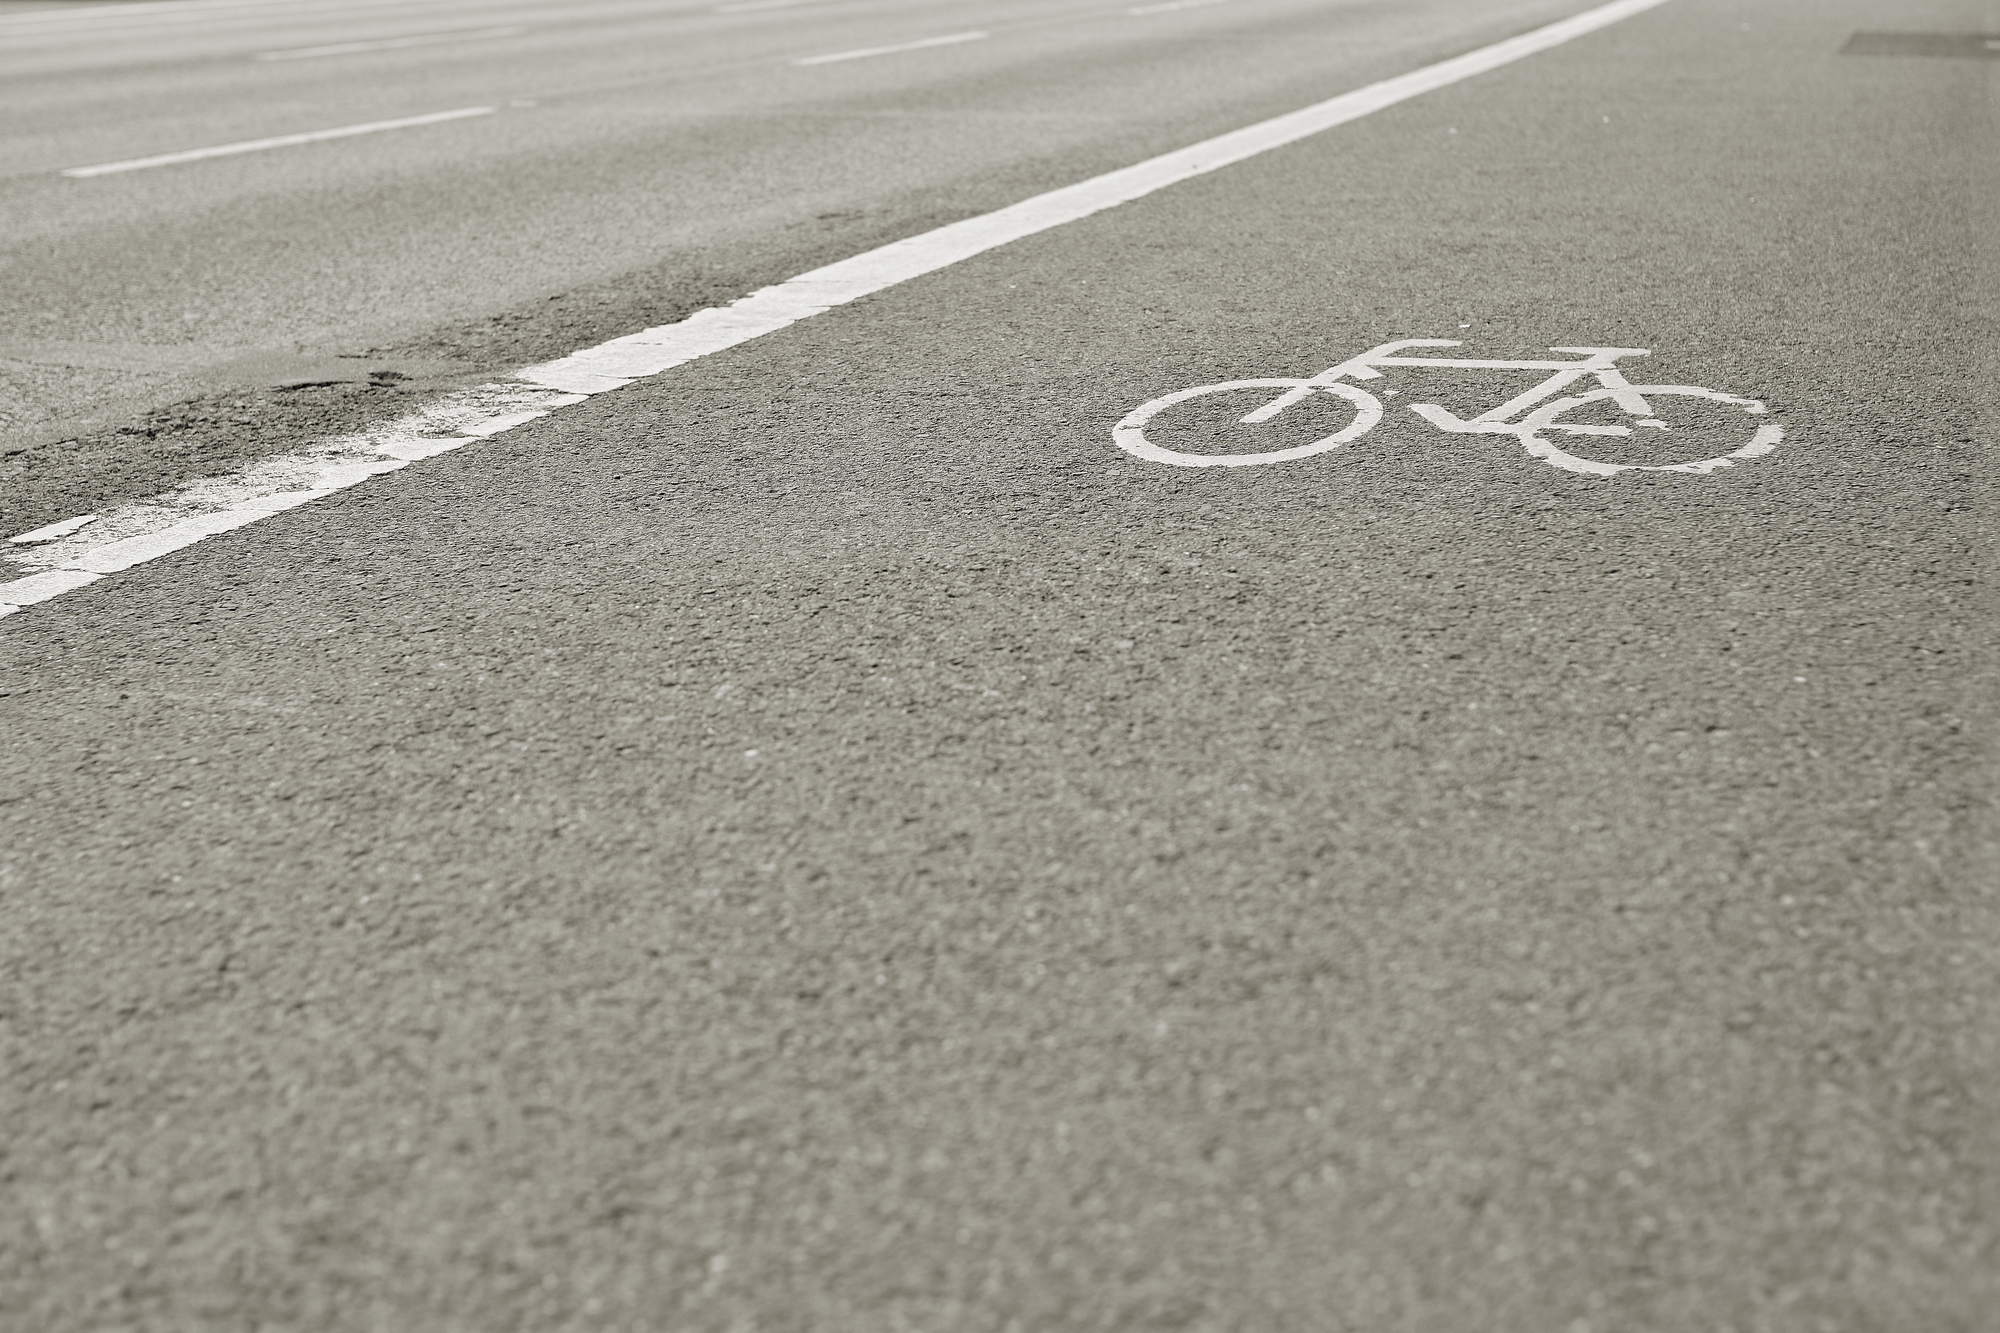 How to Reduce the Risk of a Bicycle Accident - bike lane